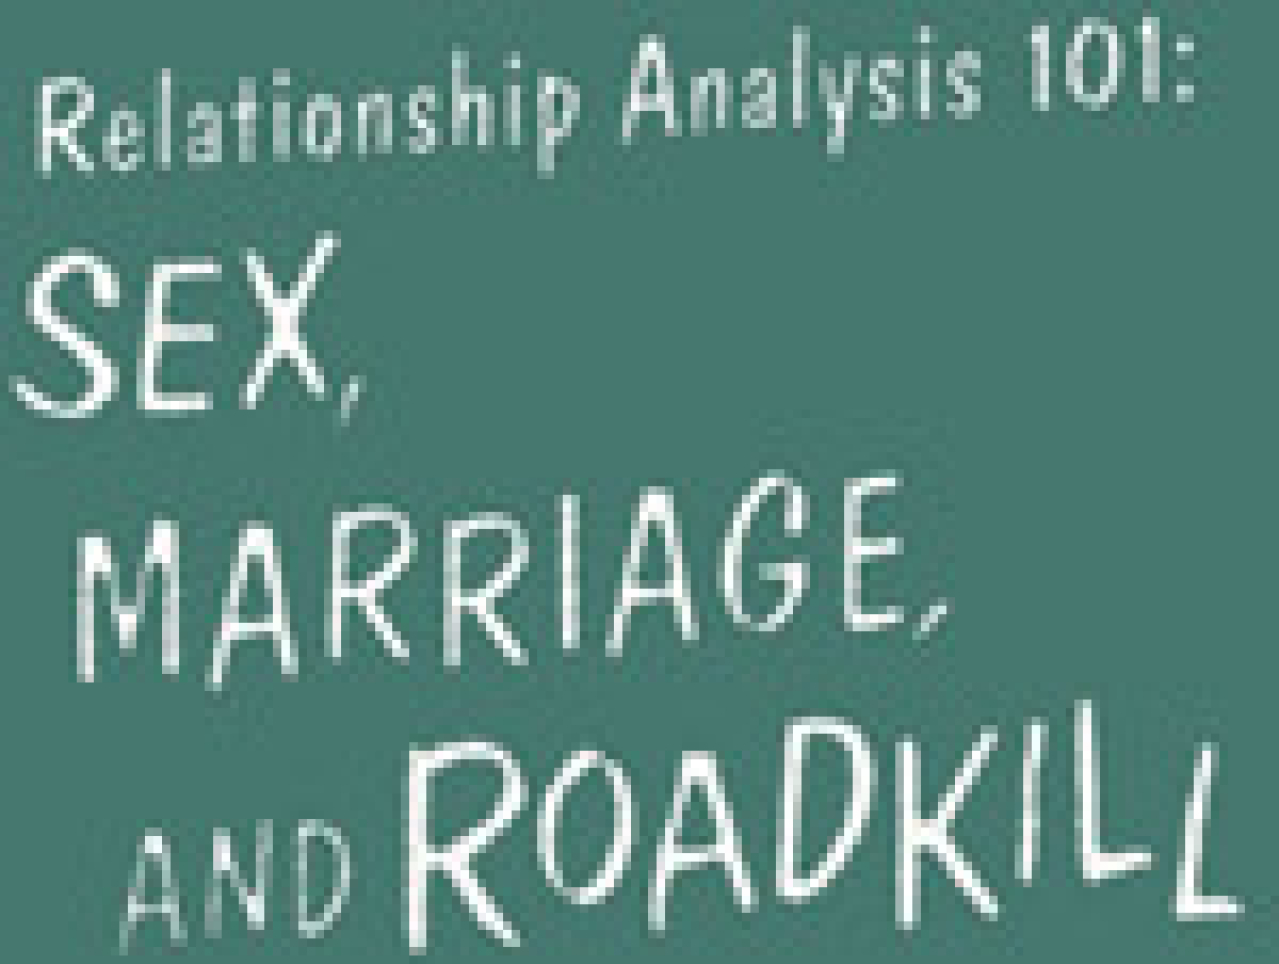 relationship analysis 101 sex marriage and roadkill logo 1472